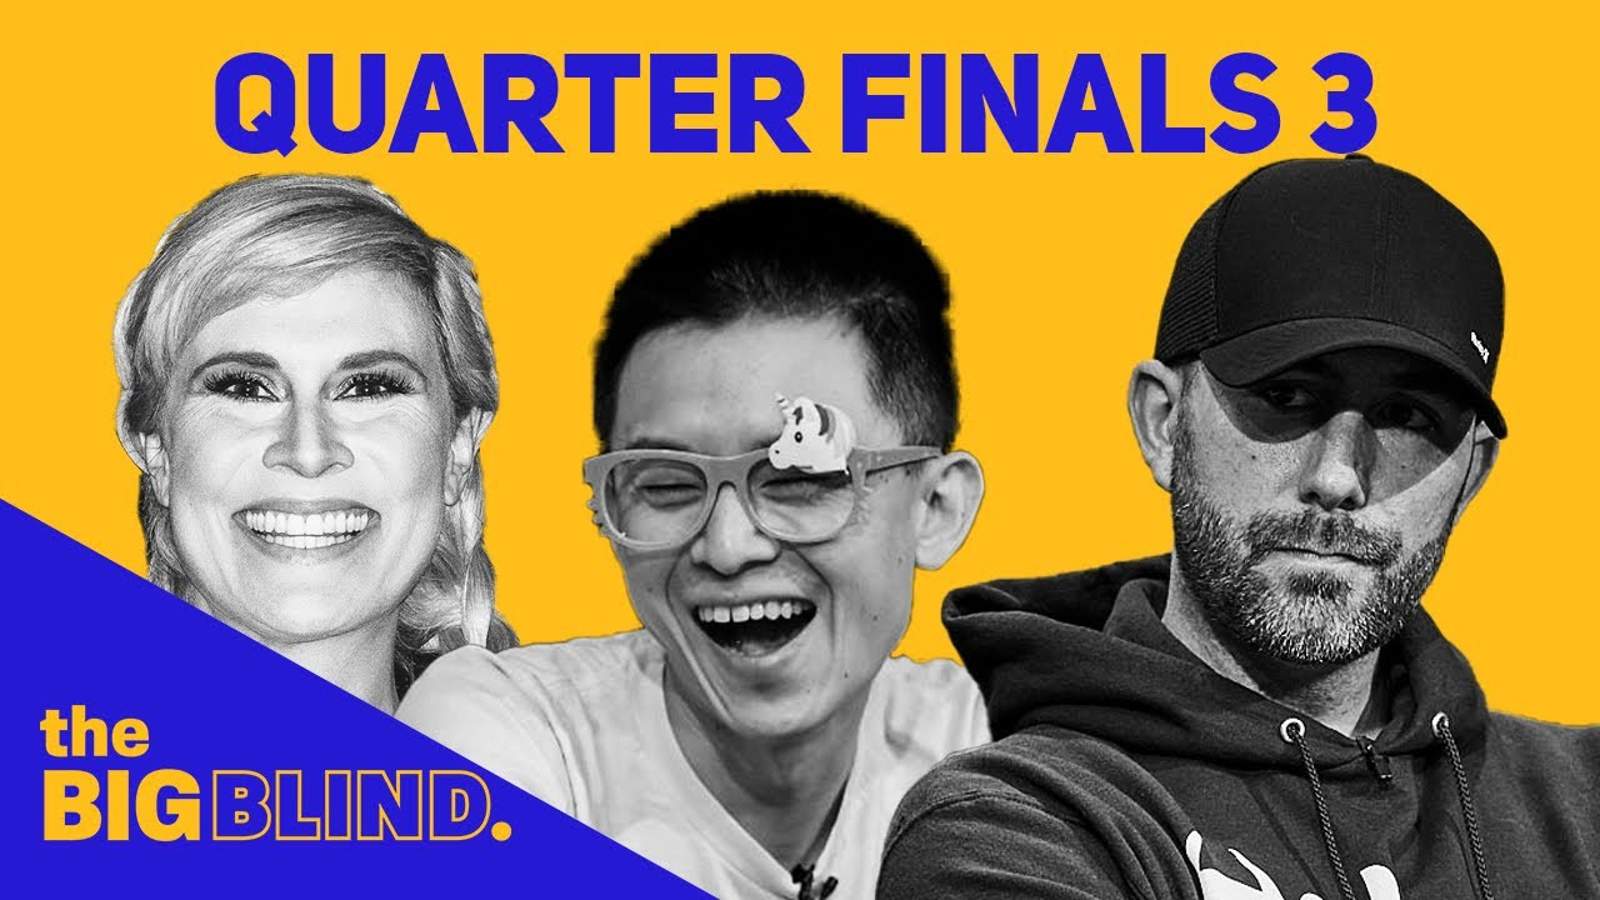 Rewatch Quarterfinals - Game 3 of The Big Blind on YouTube and Facebook